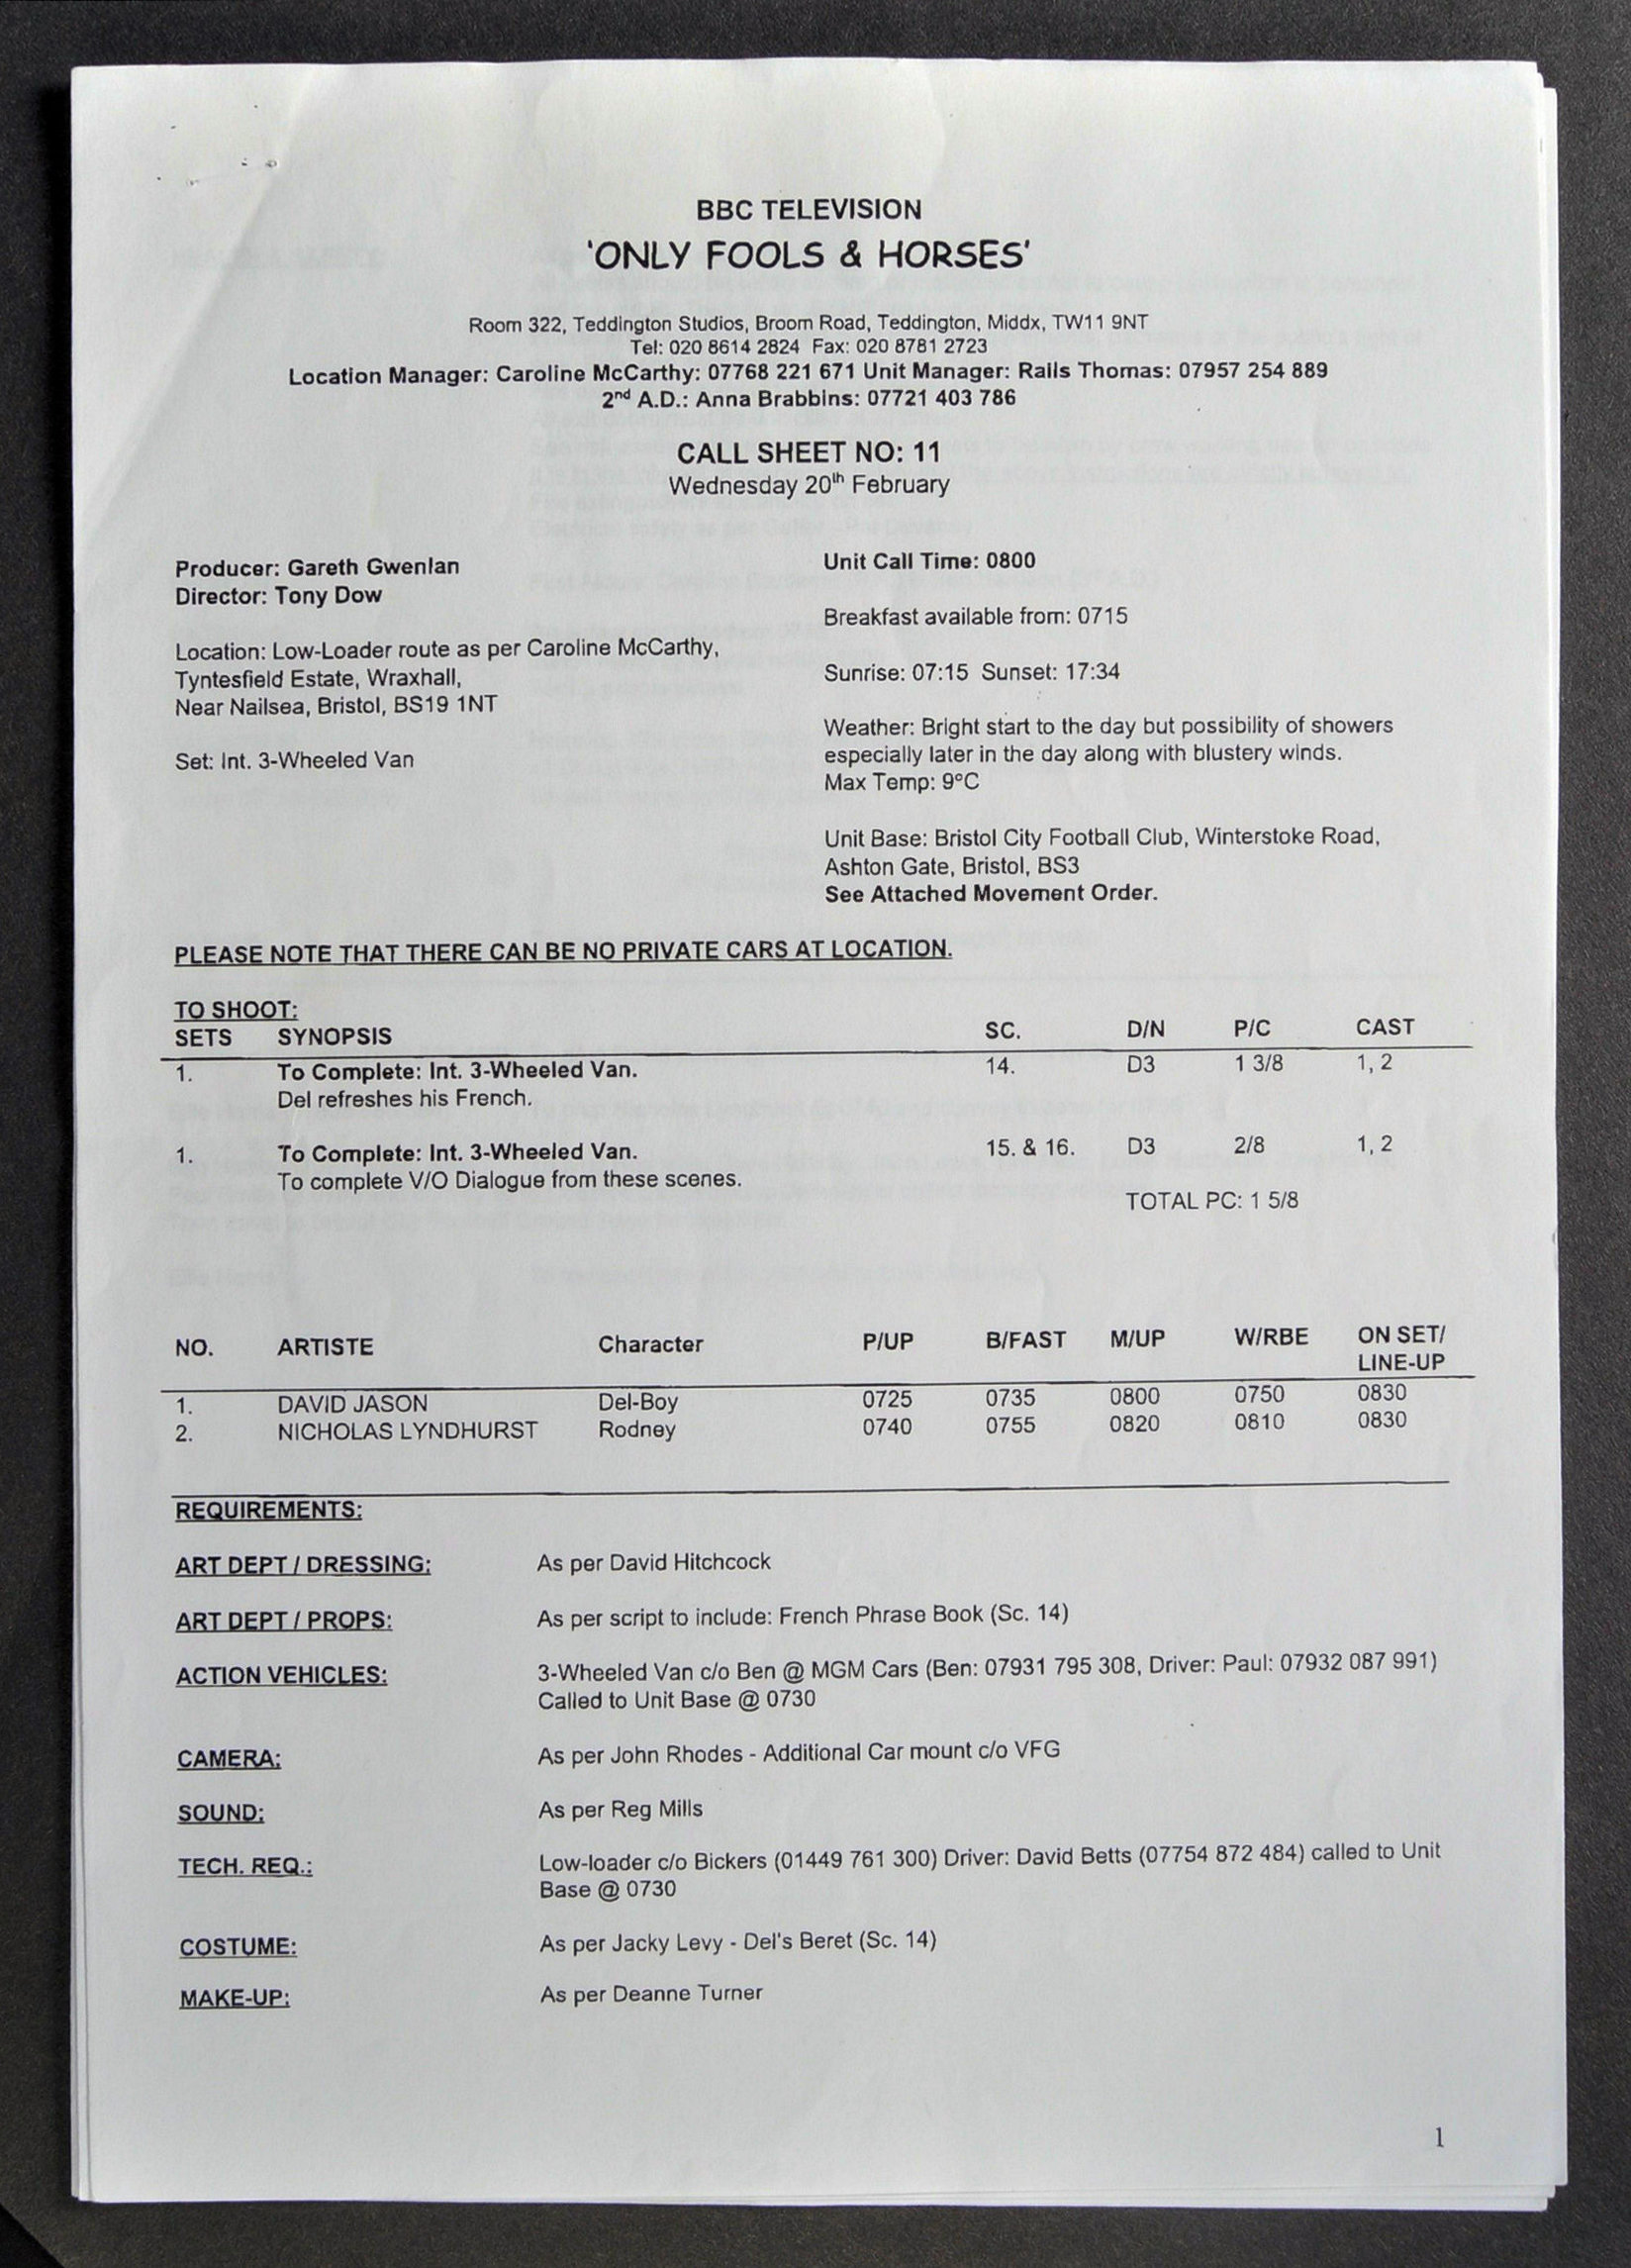 ONLY FOOLS & HORSES - STRANGERS ON THE SHORE - CALL SHEET